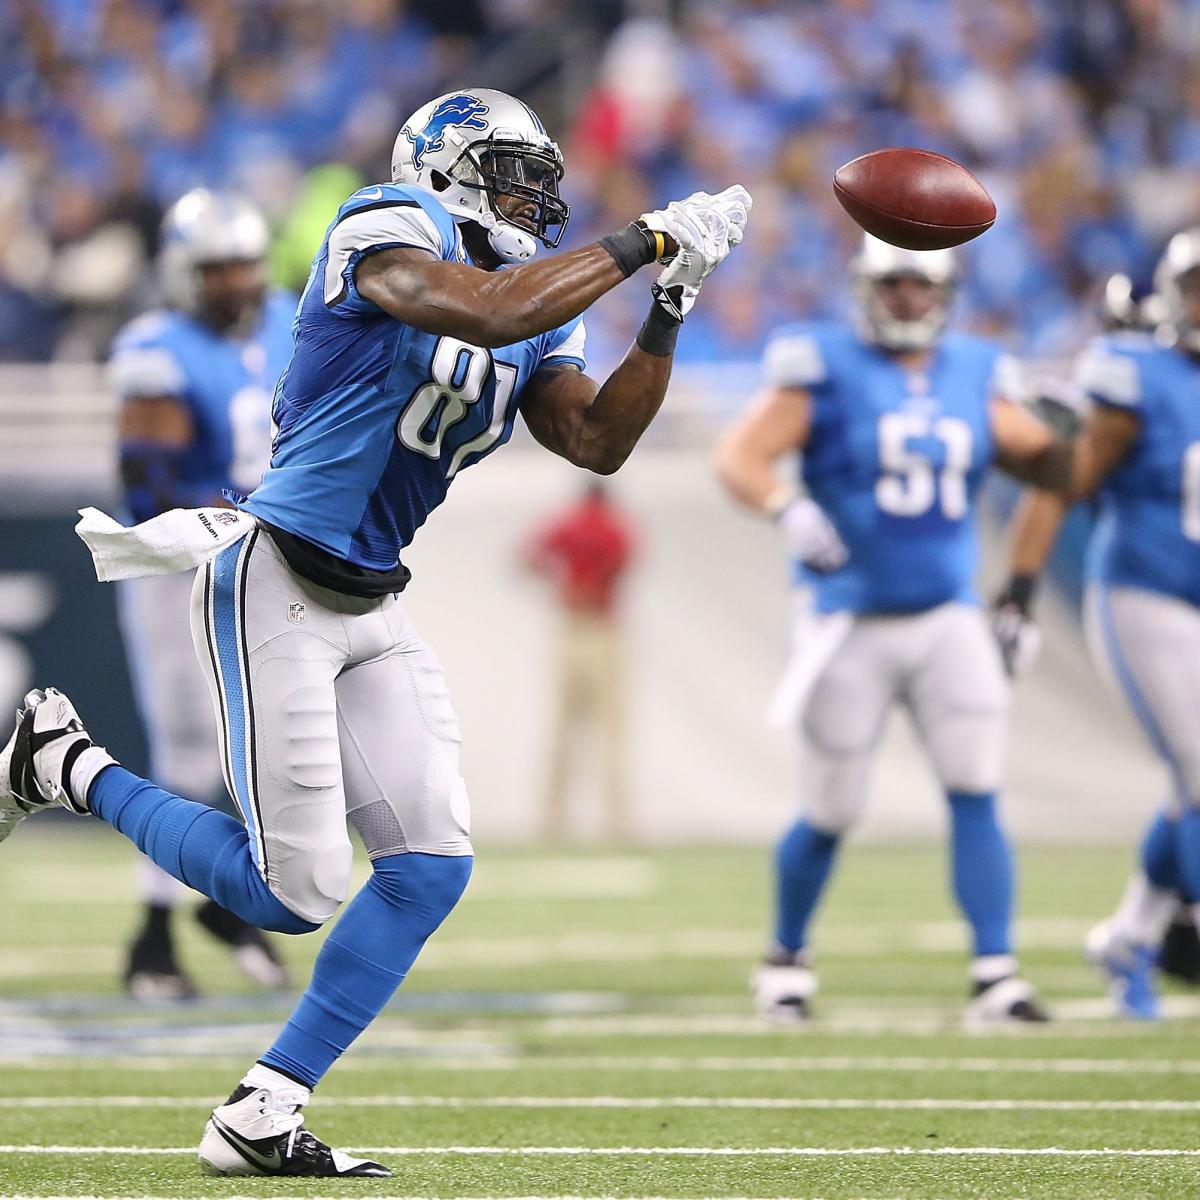 Lions' Loss to Ravens Deals Crippling Blow to Detroit's Playoff Hopes